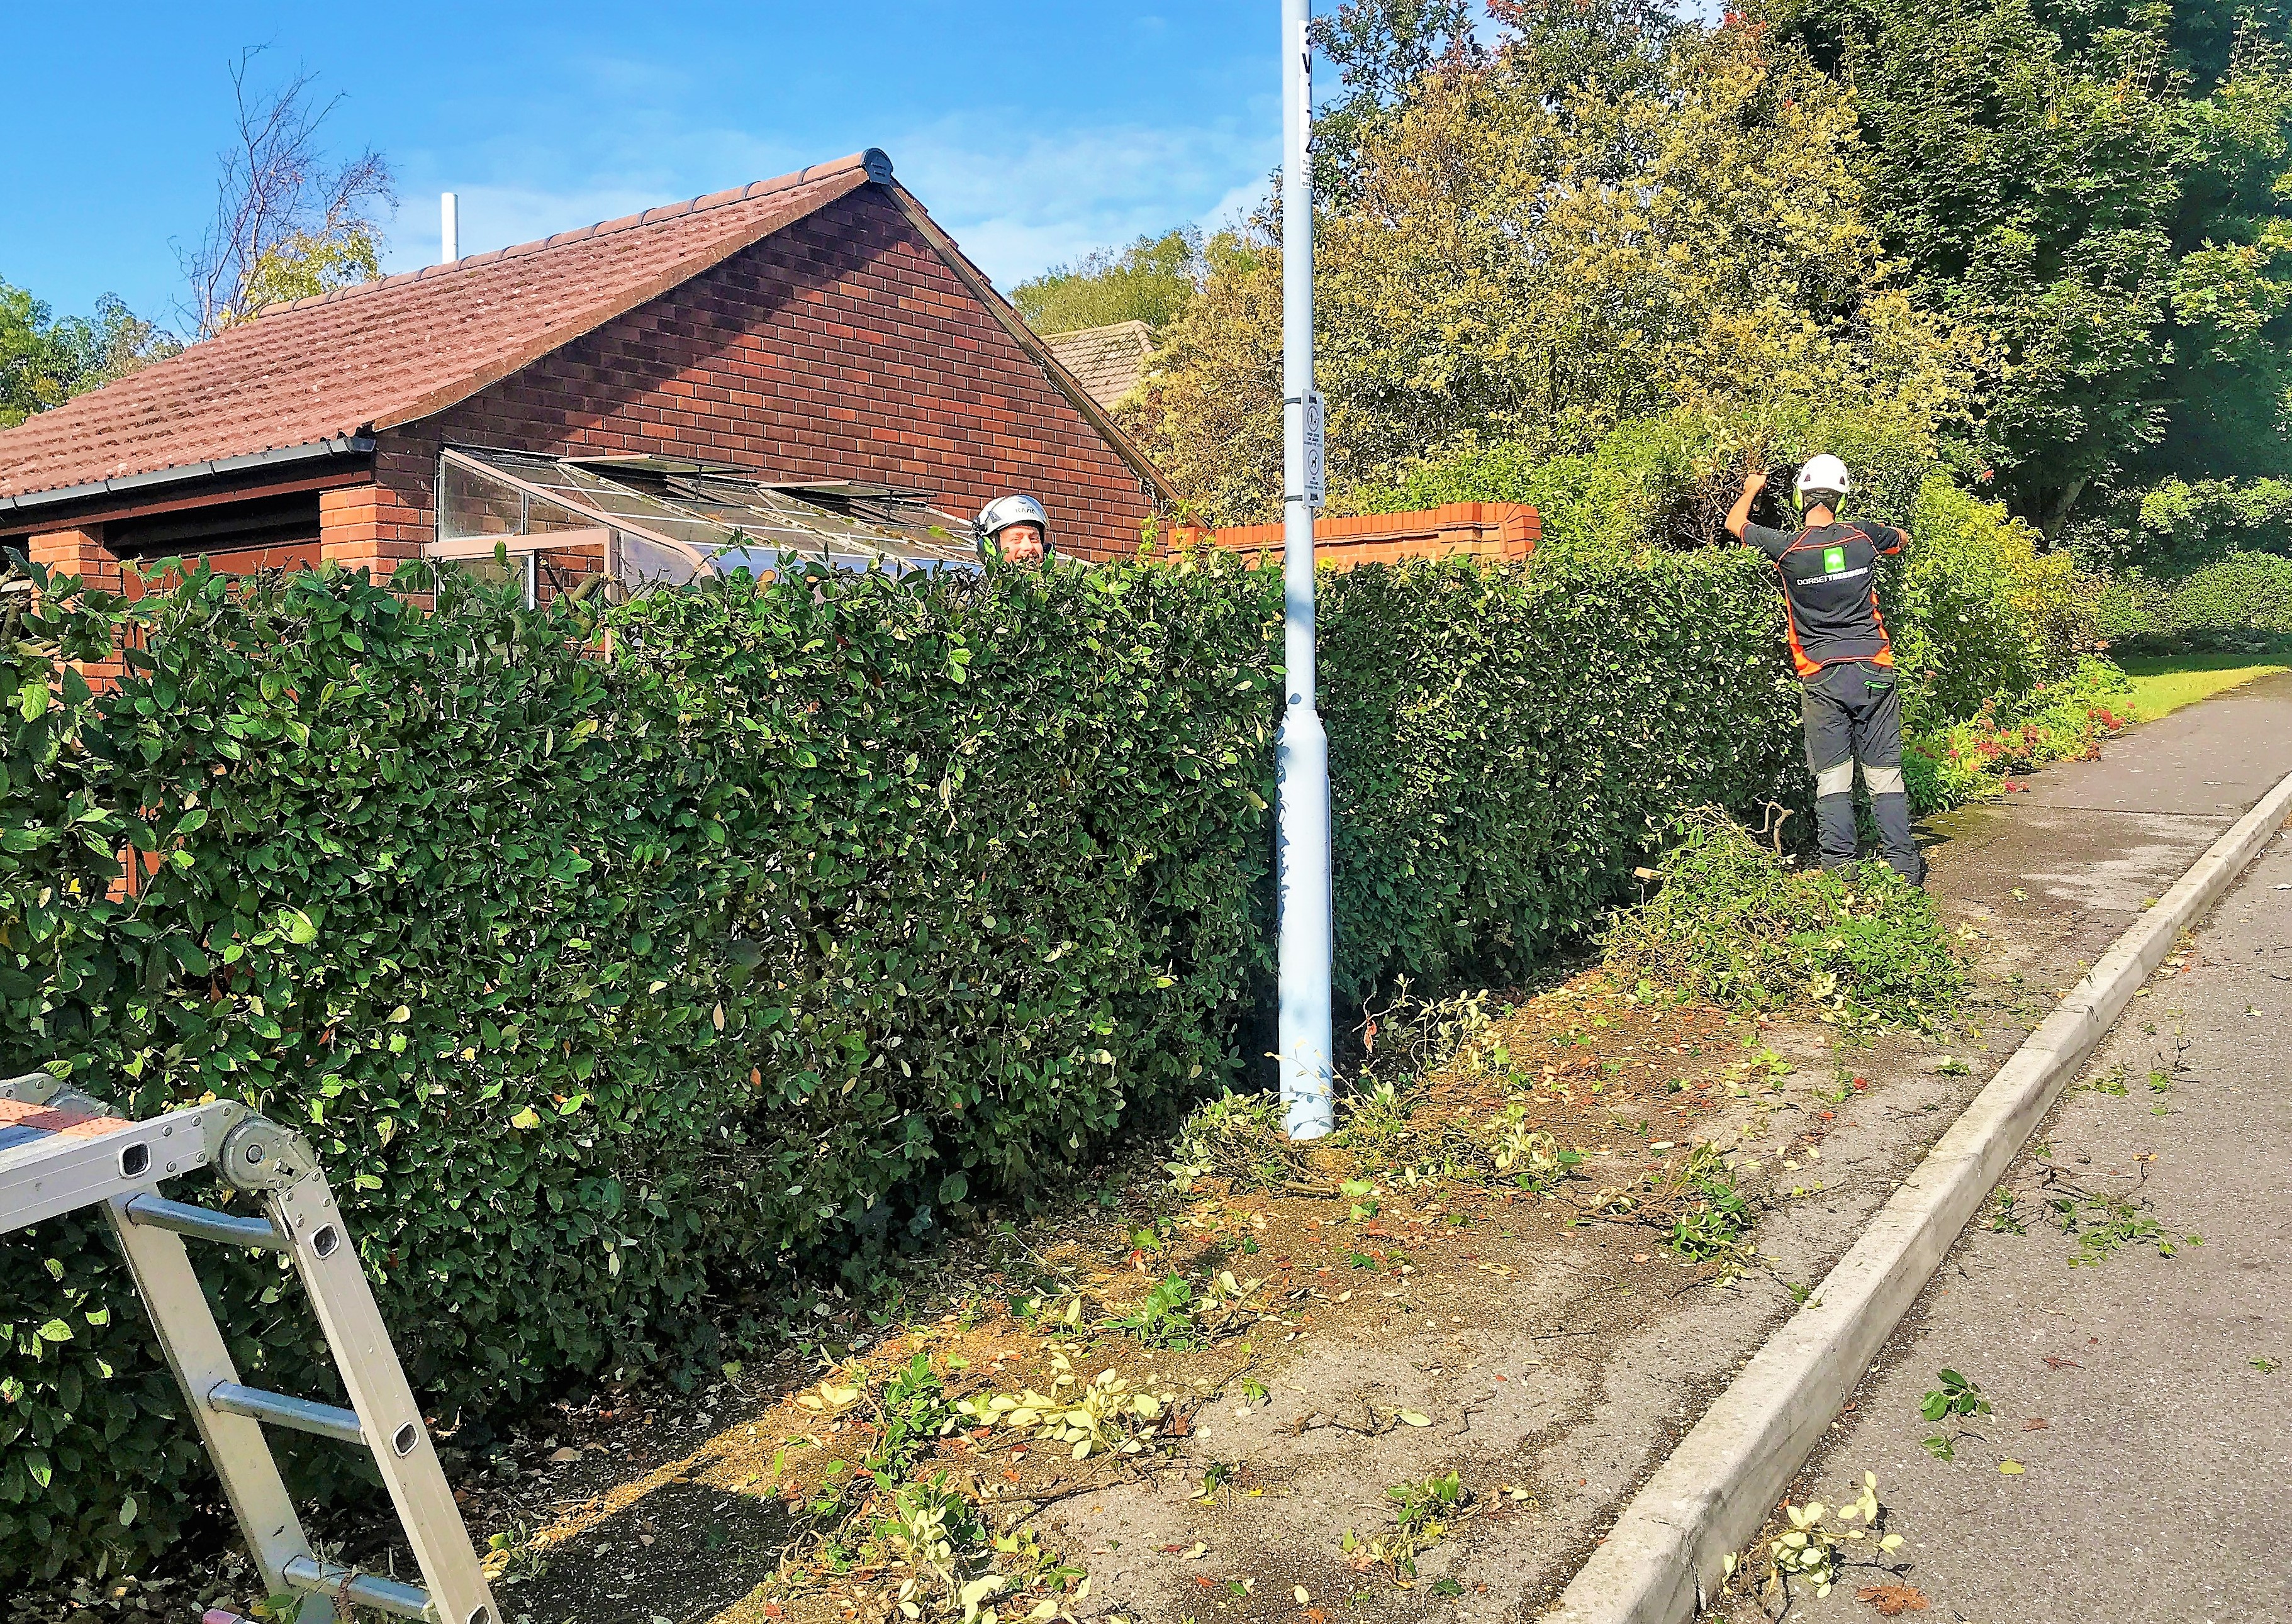 Weymouth Hedge Trimming, Hedge Removal, Hedge Cutting in Weymouth, Dorchester, Portland - Weymouth tree surgeon